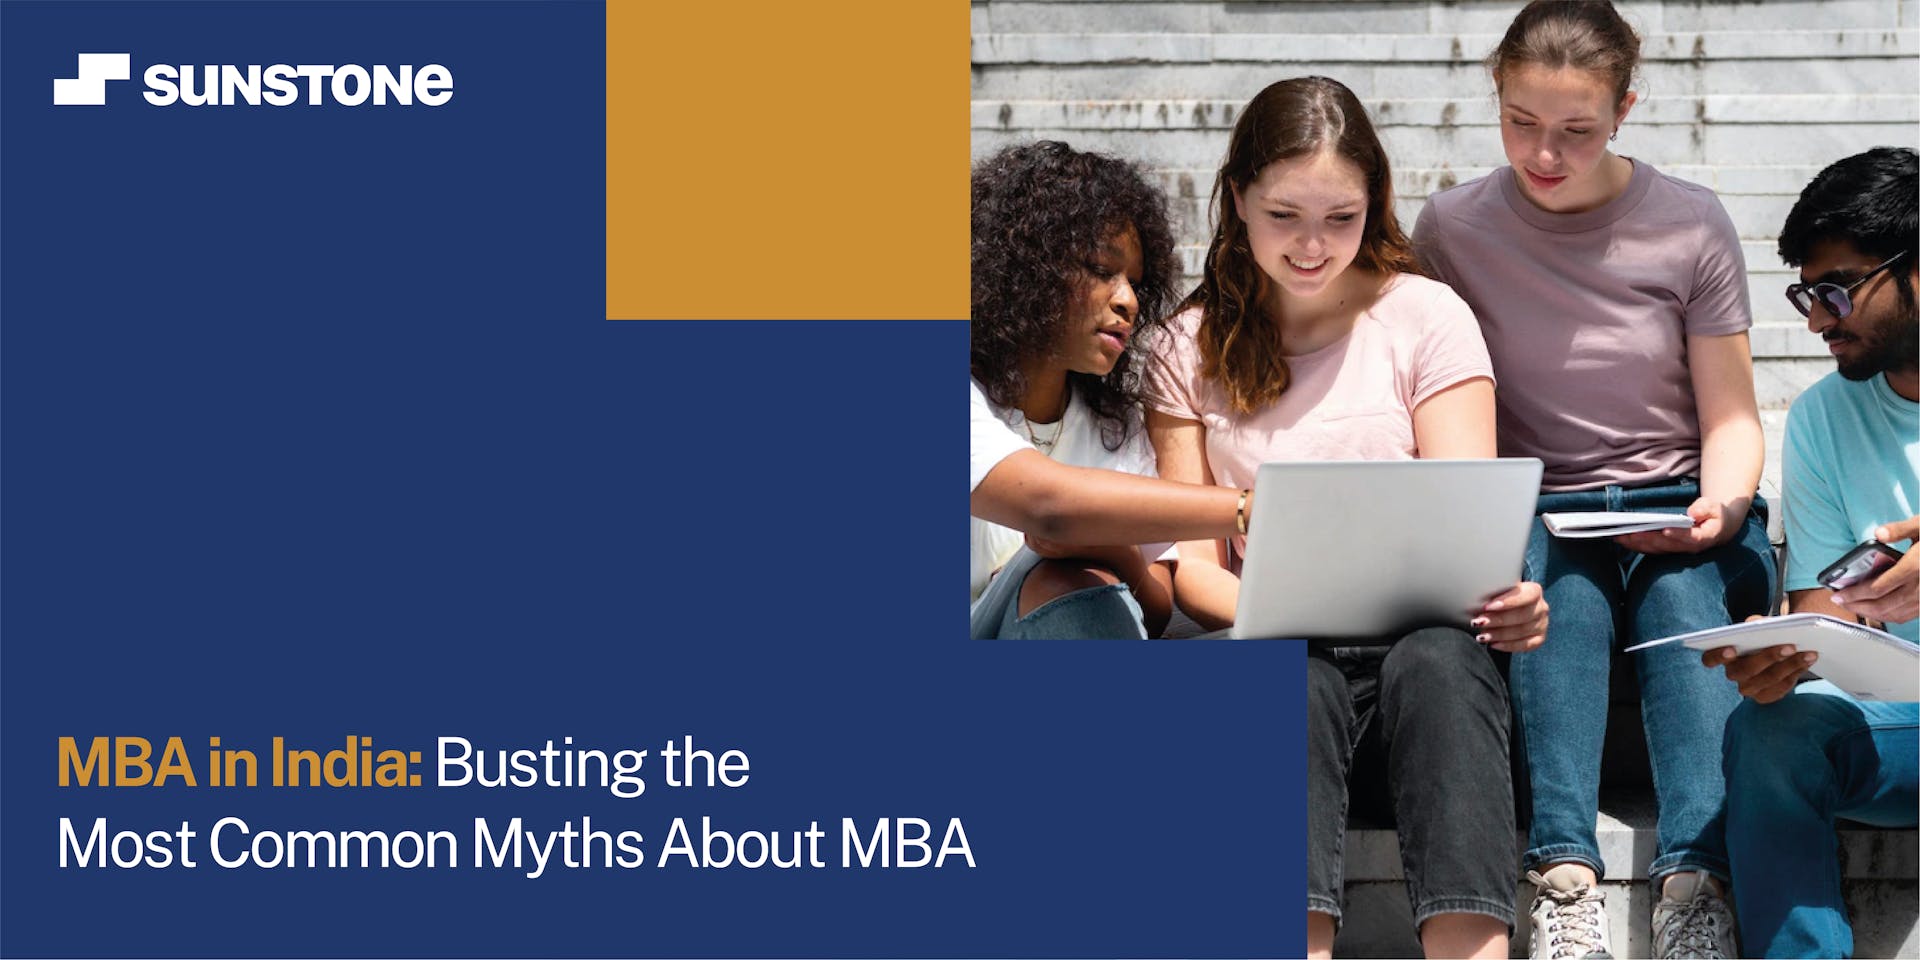 MBA in India: Busting the Most Common Myths About MBA